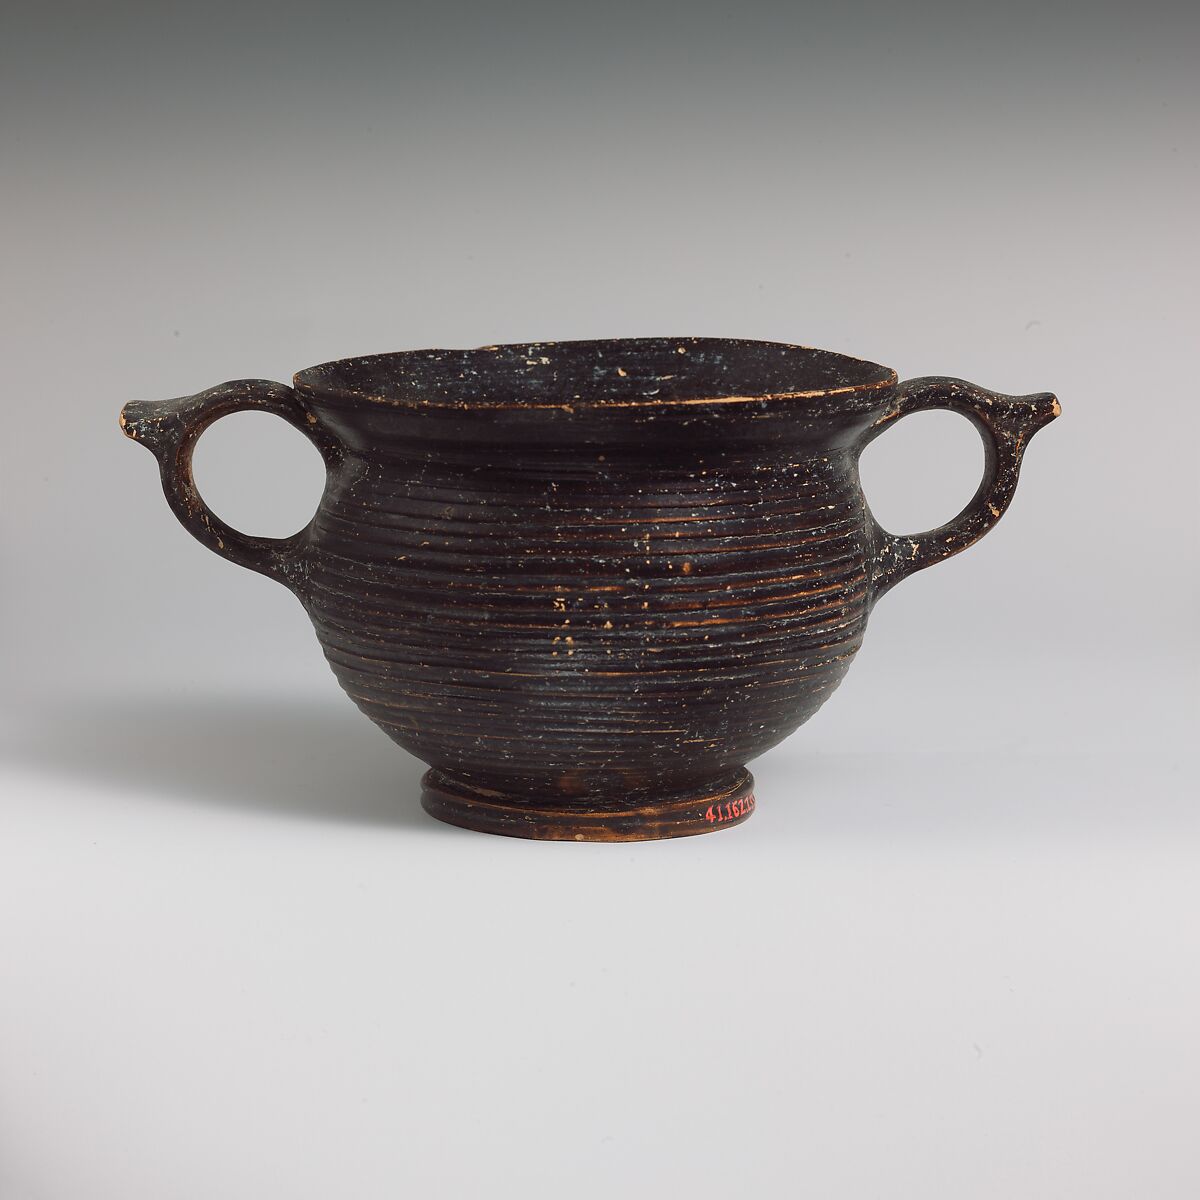 Terracotta kantharos (drinking cup) with vertical ring handles, Terracotta, Greek, Boeotian 